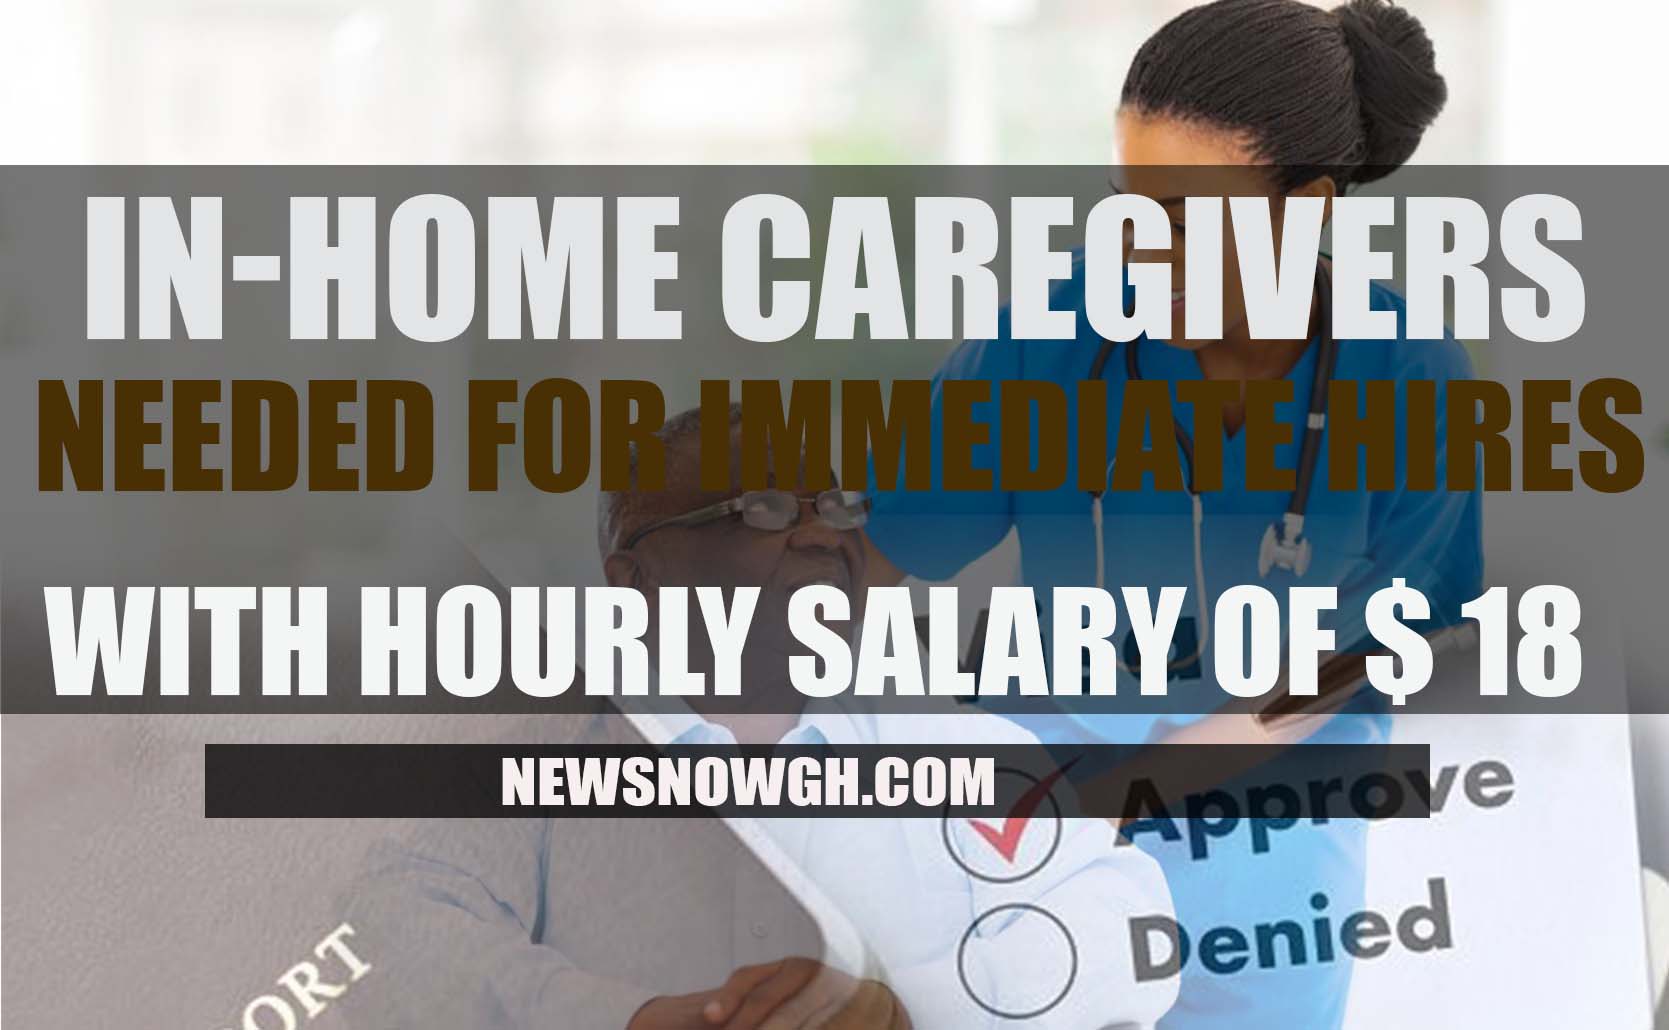 In Home Caregivers Job 